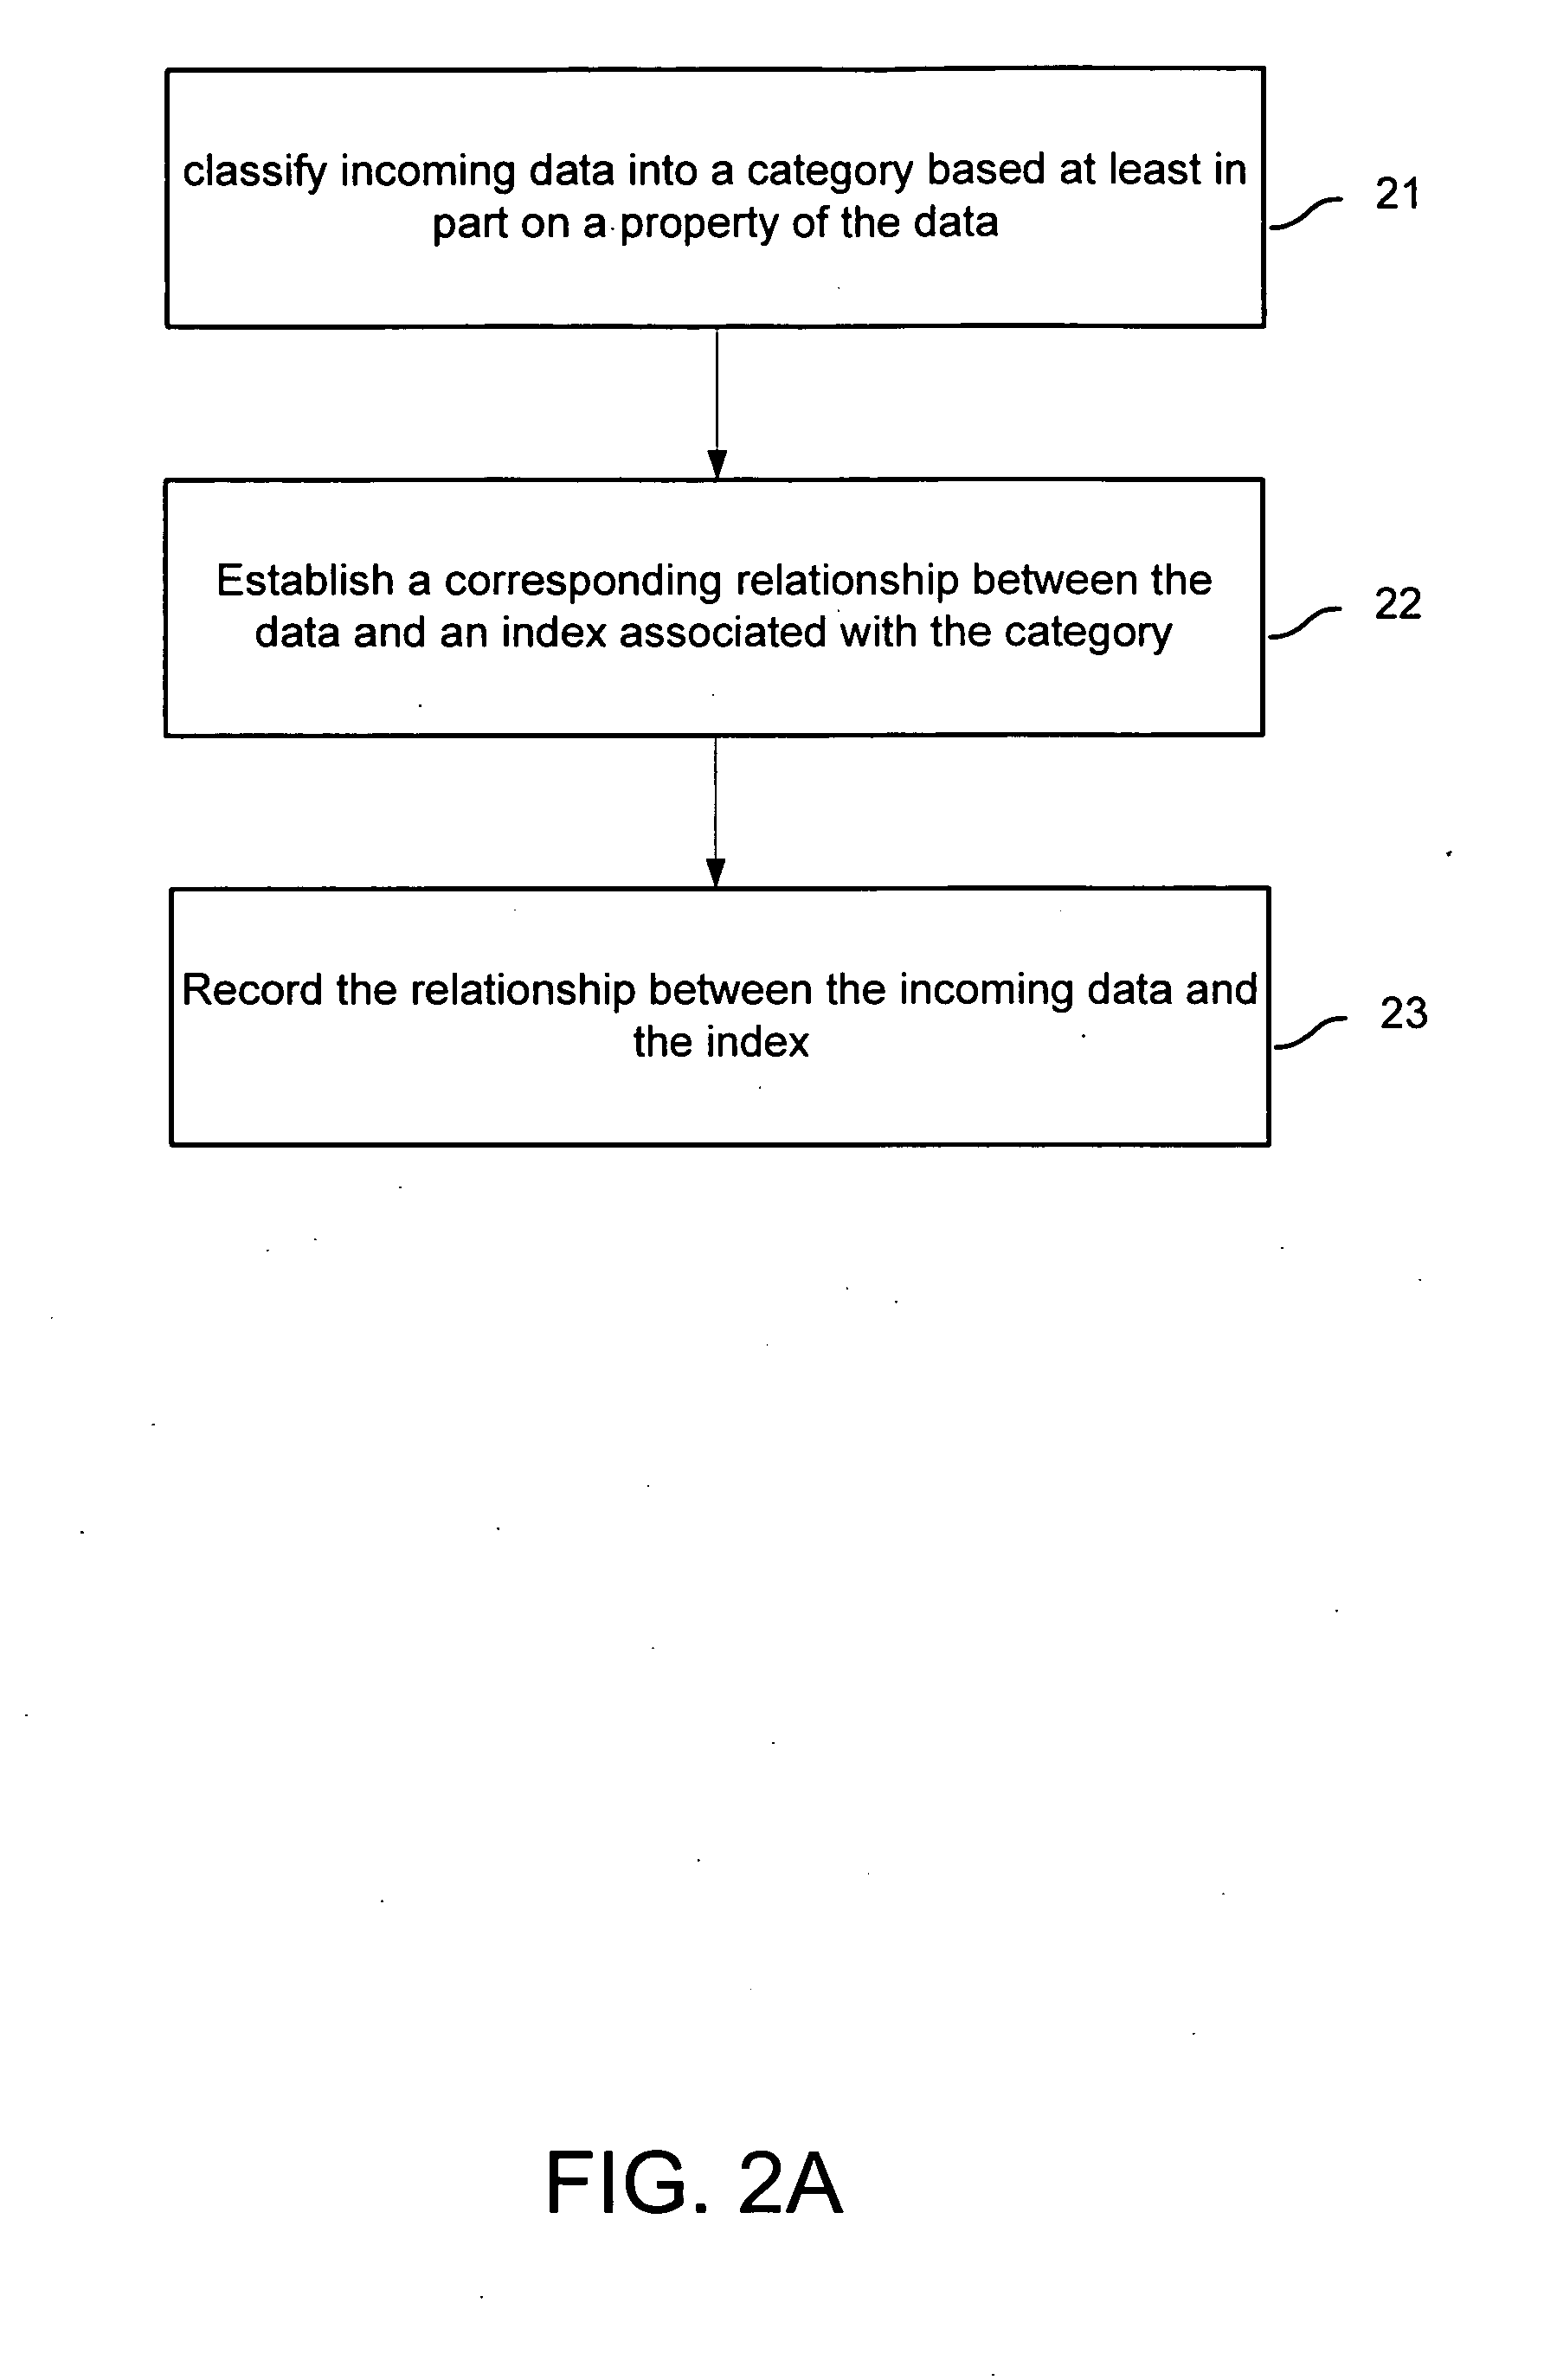 Method and system for search engine indexing and searching using the index